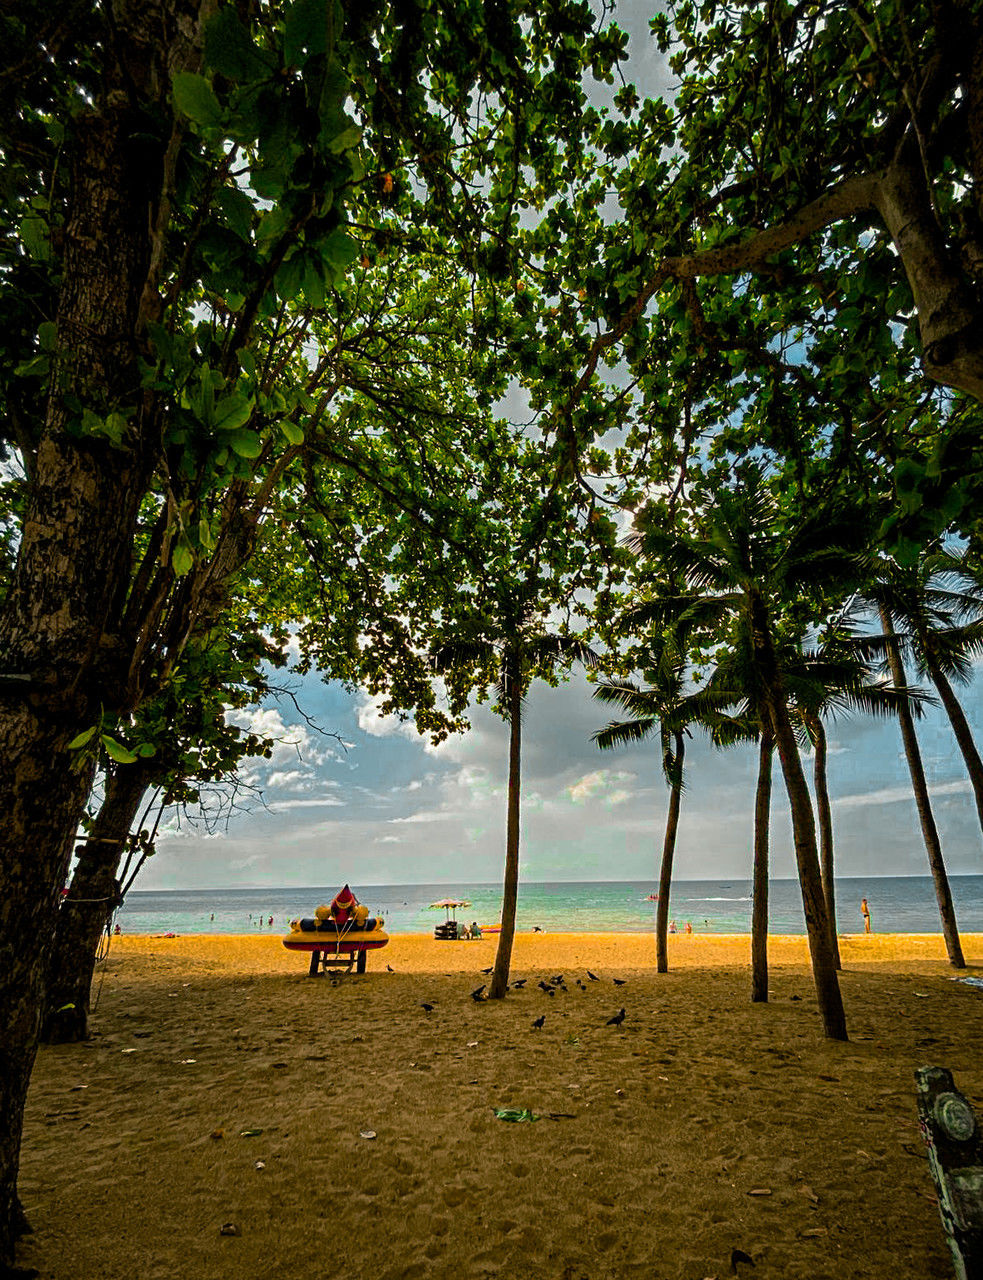 tree, plant, land, beach, water, nature, sea, beauty in nature, sunlight, sky, sand, scenics - nature, tranquility, outdoors, leaf, tranquil scene, natural environment, travel, day, vacation, holiday, trip, body of water, tree trunk, morning, horizon over water, travel destinations, transportation, trunk, growth, environment, leisure activity, branch, tropical climate, relaxation, men, sitting, mode of transportation